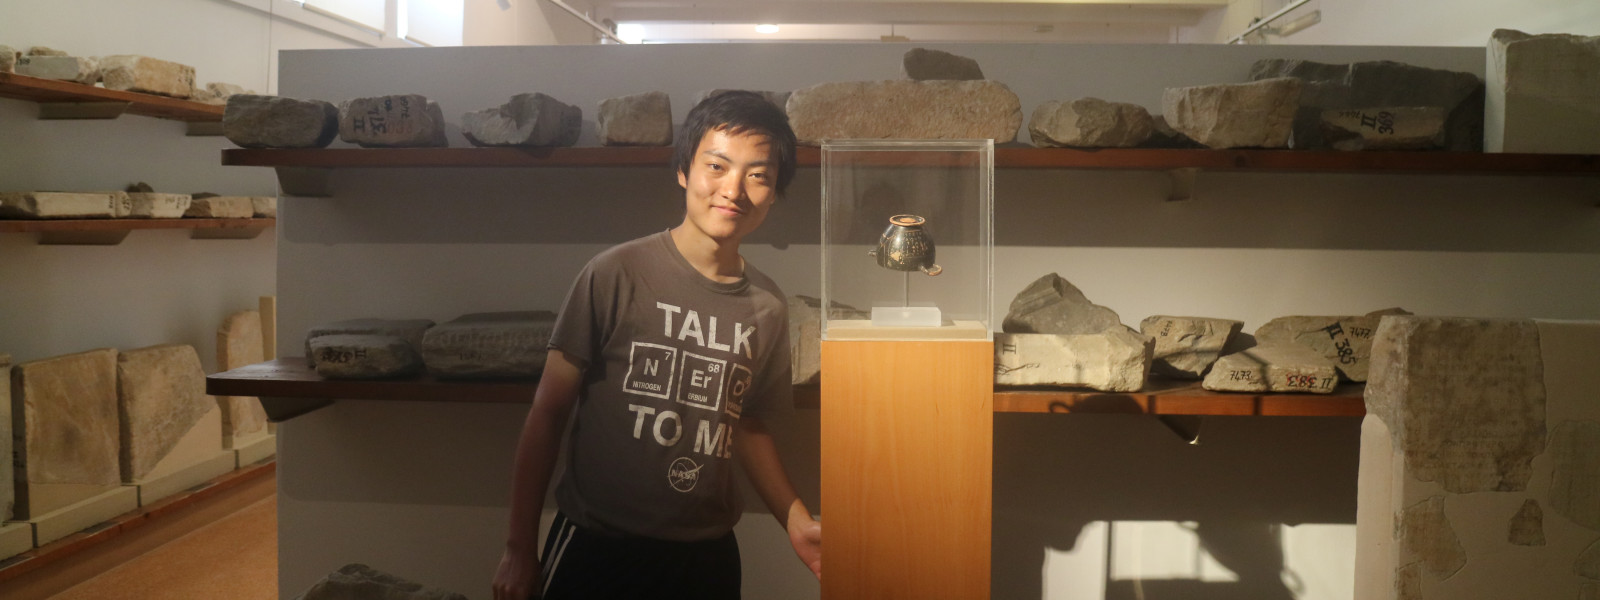 The student is standing next to a display case and there are shelves of artifacts behind him.